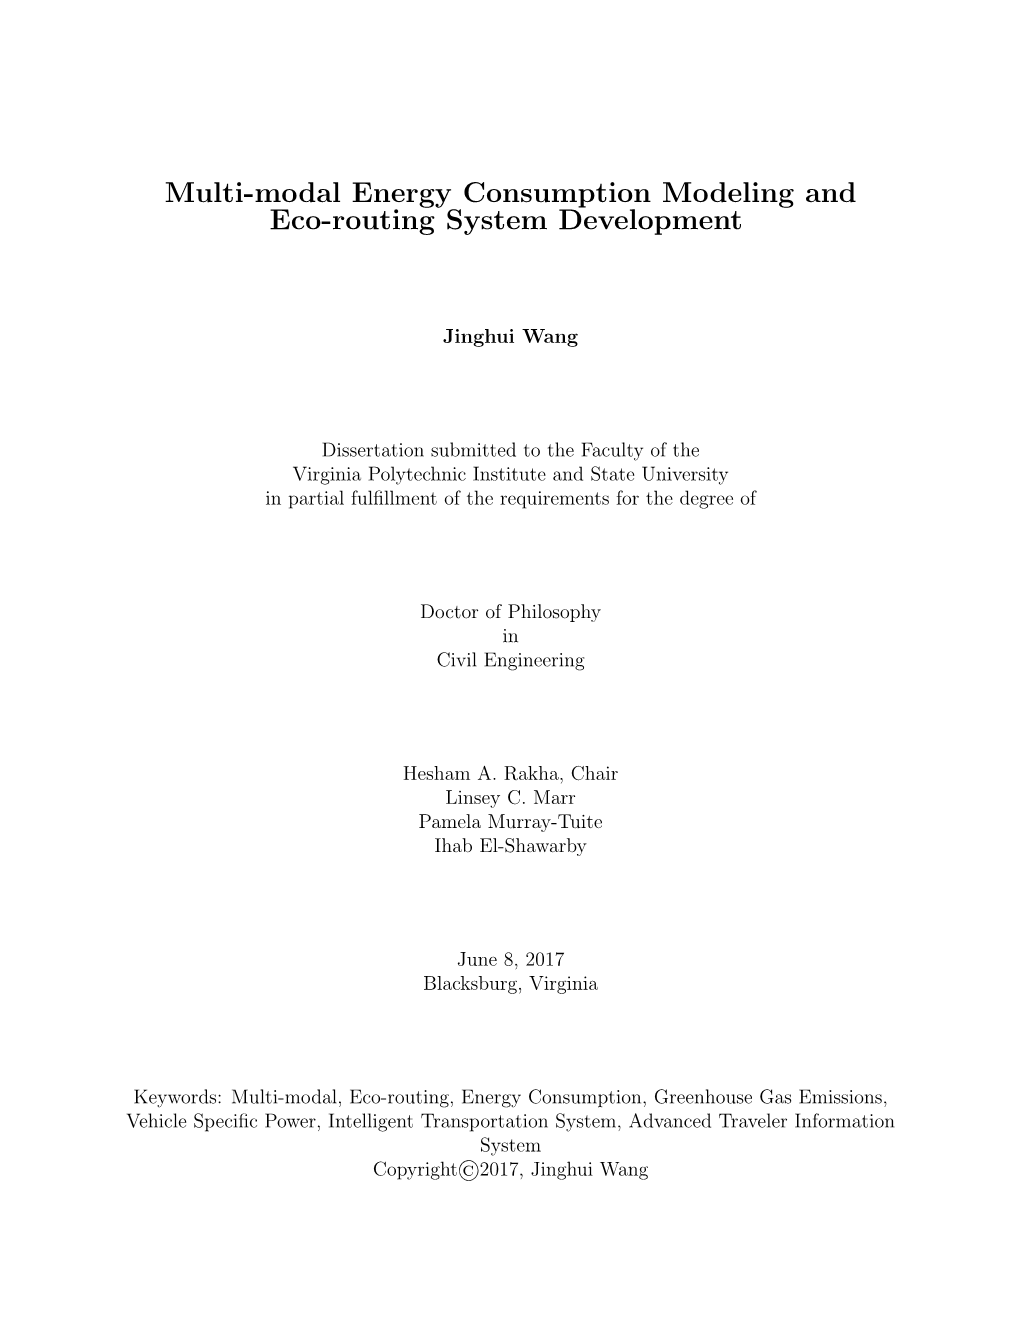 Multi-Modal Energy Consumption Modeling and Eco-Routing System Development